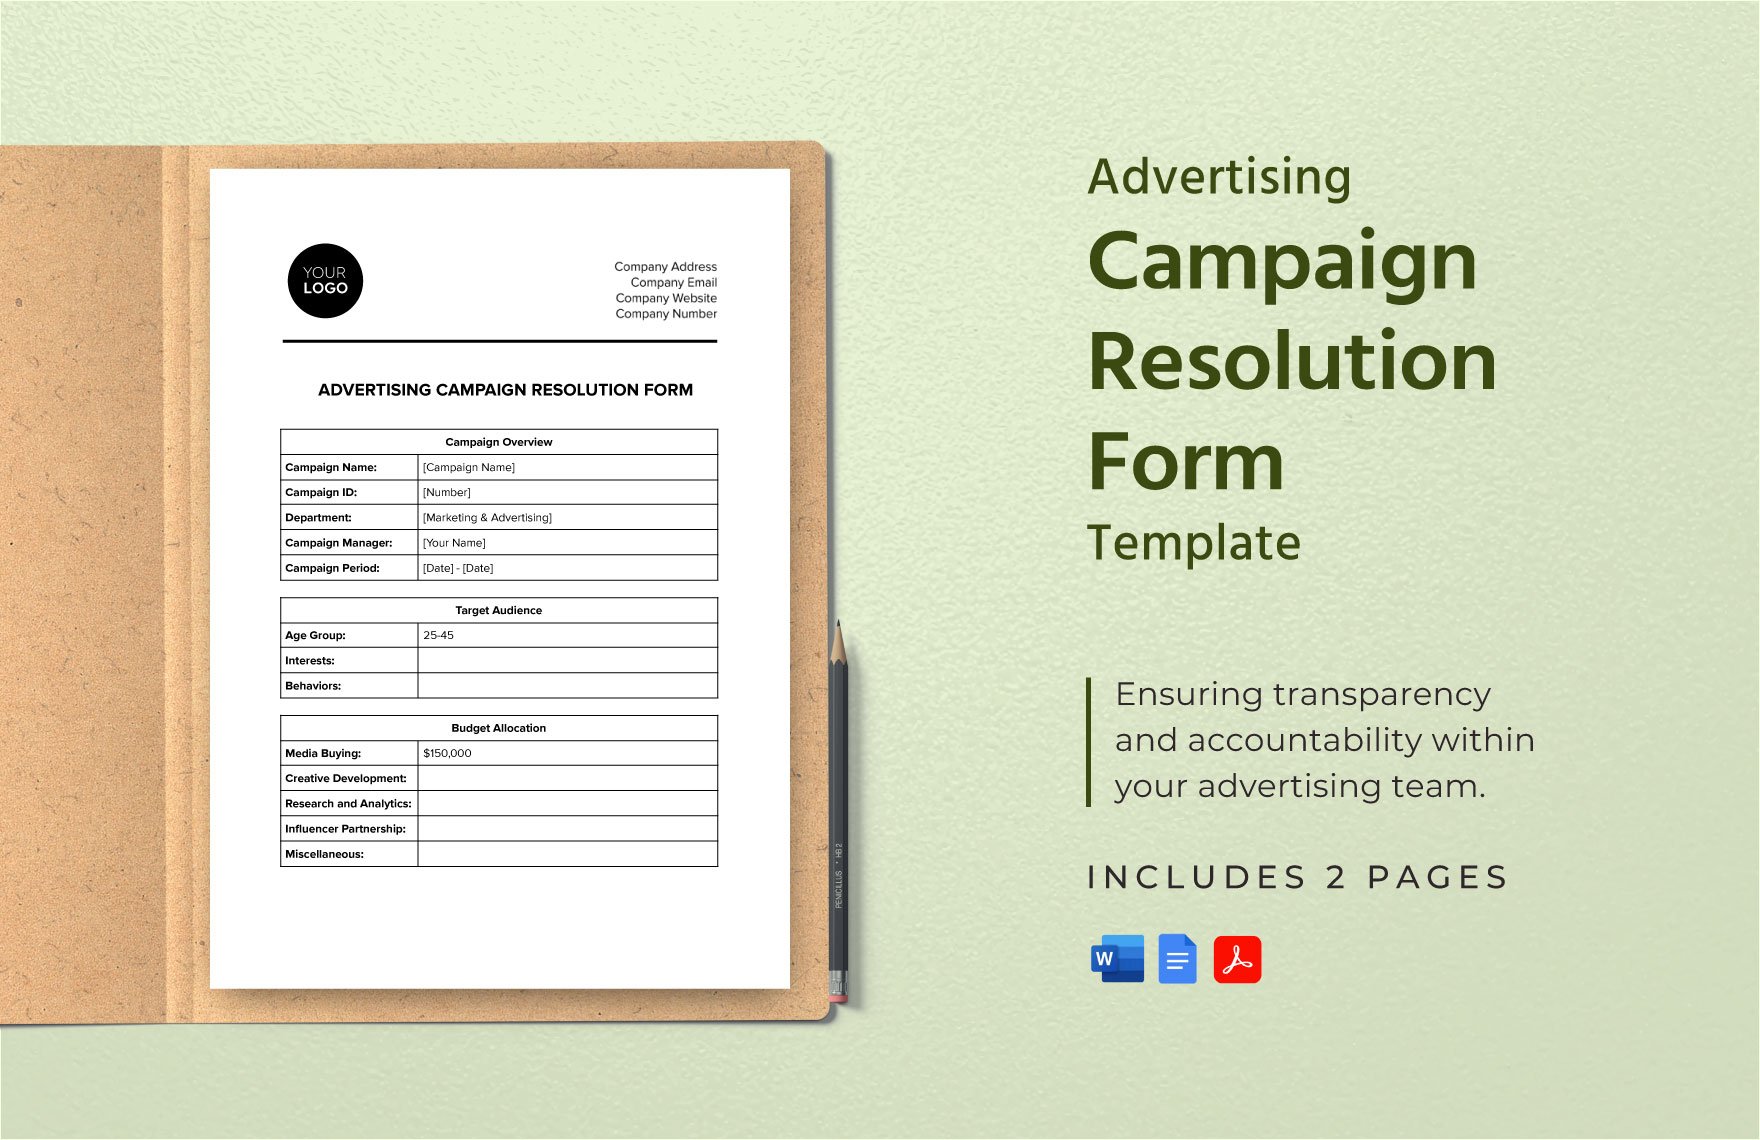 Advertising Campaign Resolution Form Template